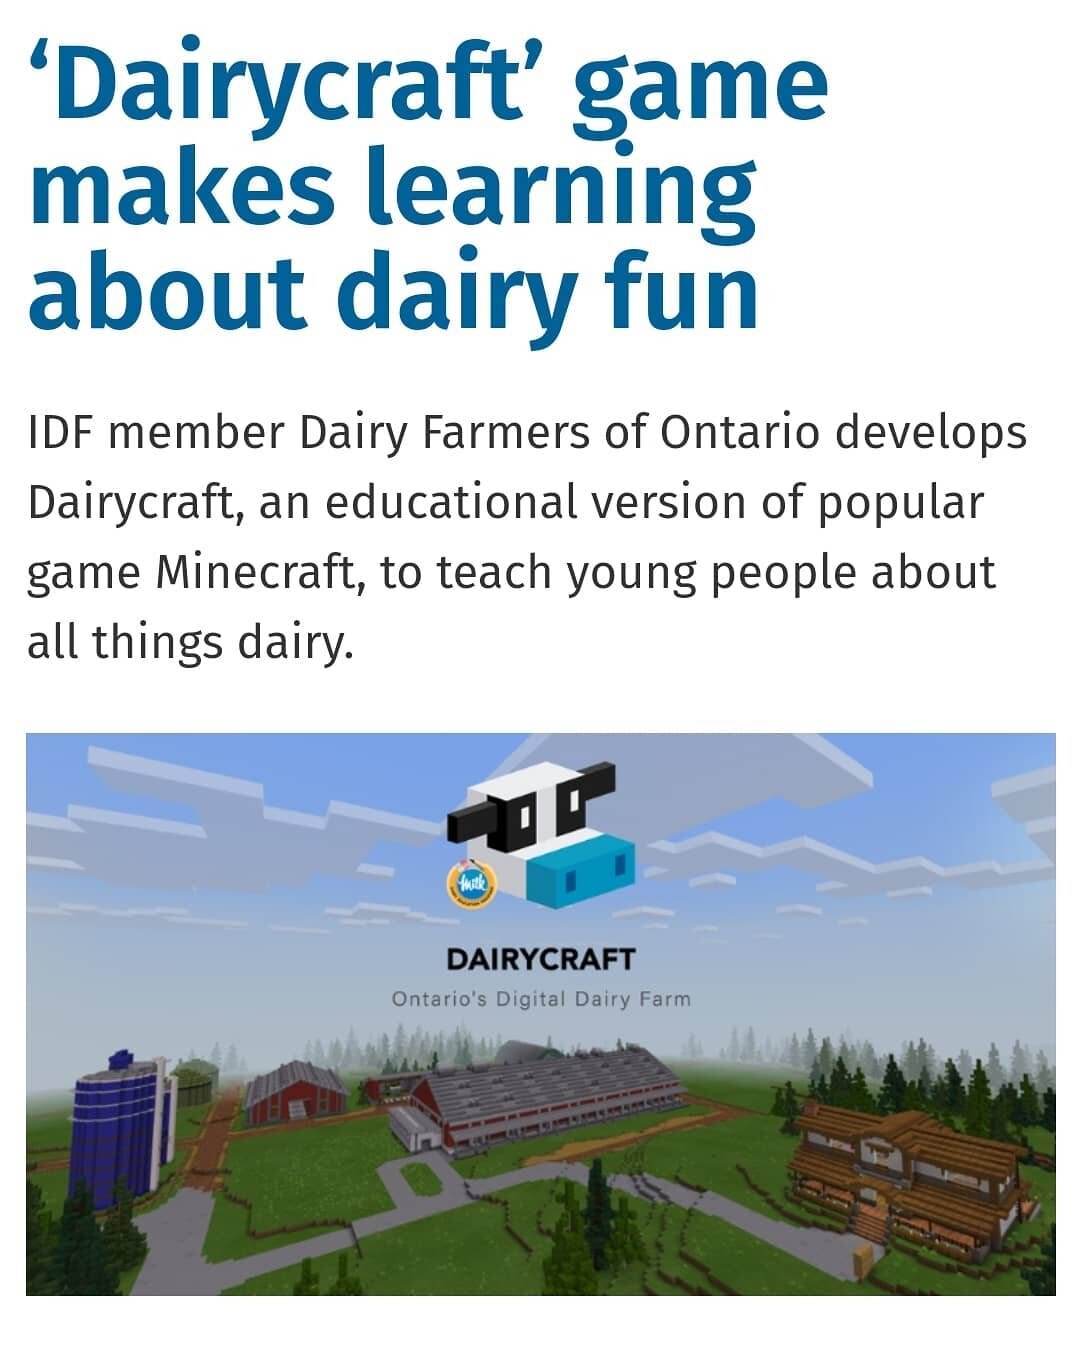 Such a clever initiative to teach kids about the dairy industry!
https://fil-idf.org/news_insights/dairycraft-game-makes-learning-about-dairy-fun/
@minecraft #education #innovation #learning #kidseducation